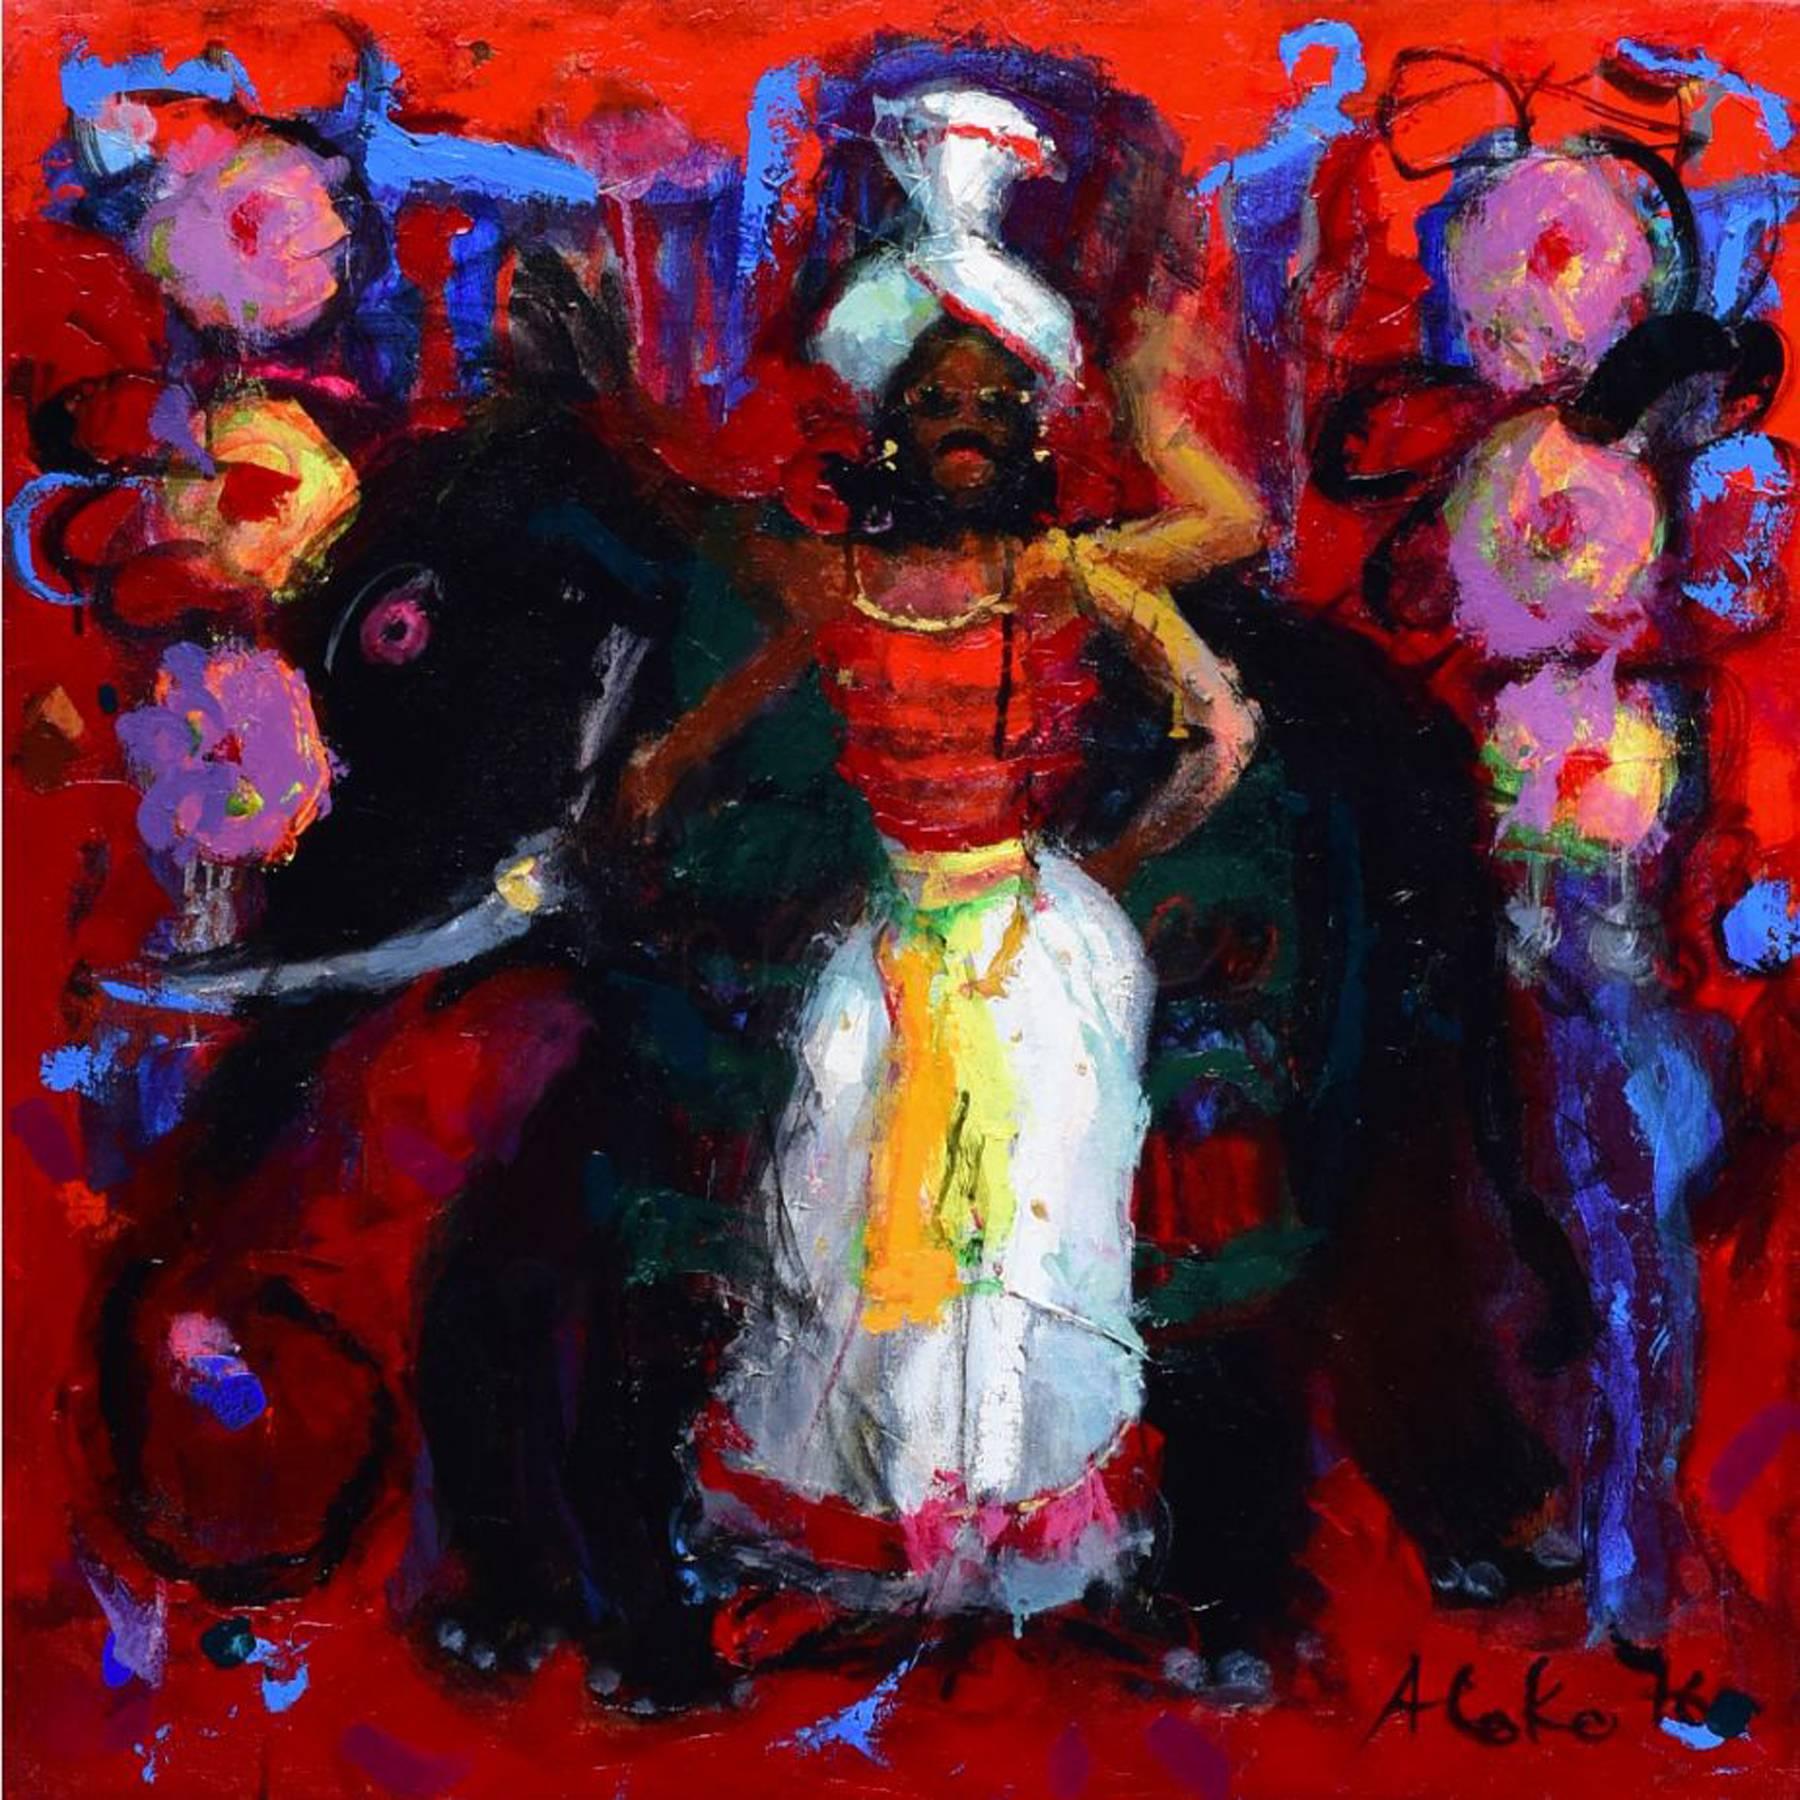 Aloke Sardar Figurative Painting - Untitled, Acrylic on canvas by Contemporary Artist "In Stock"